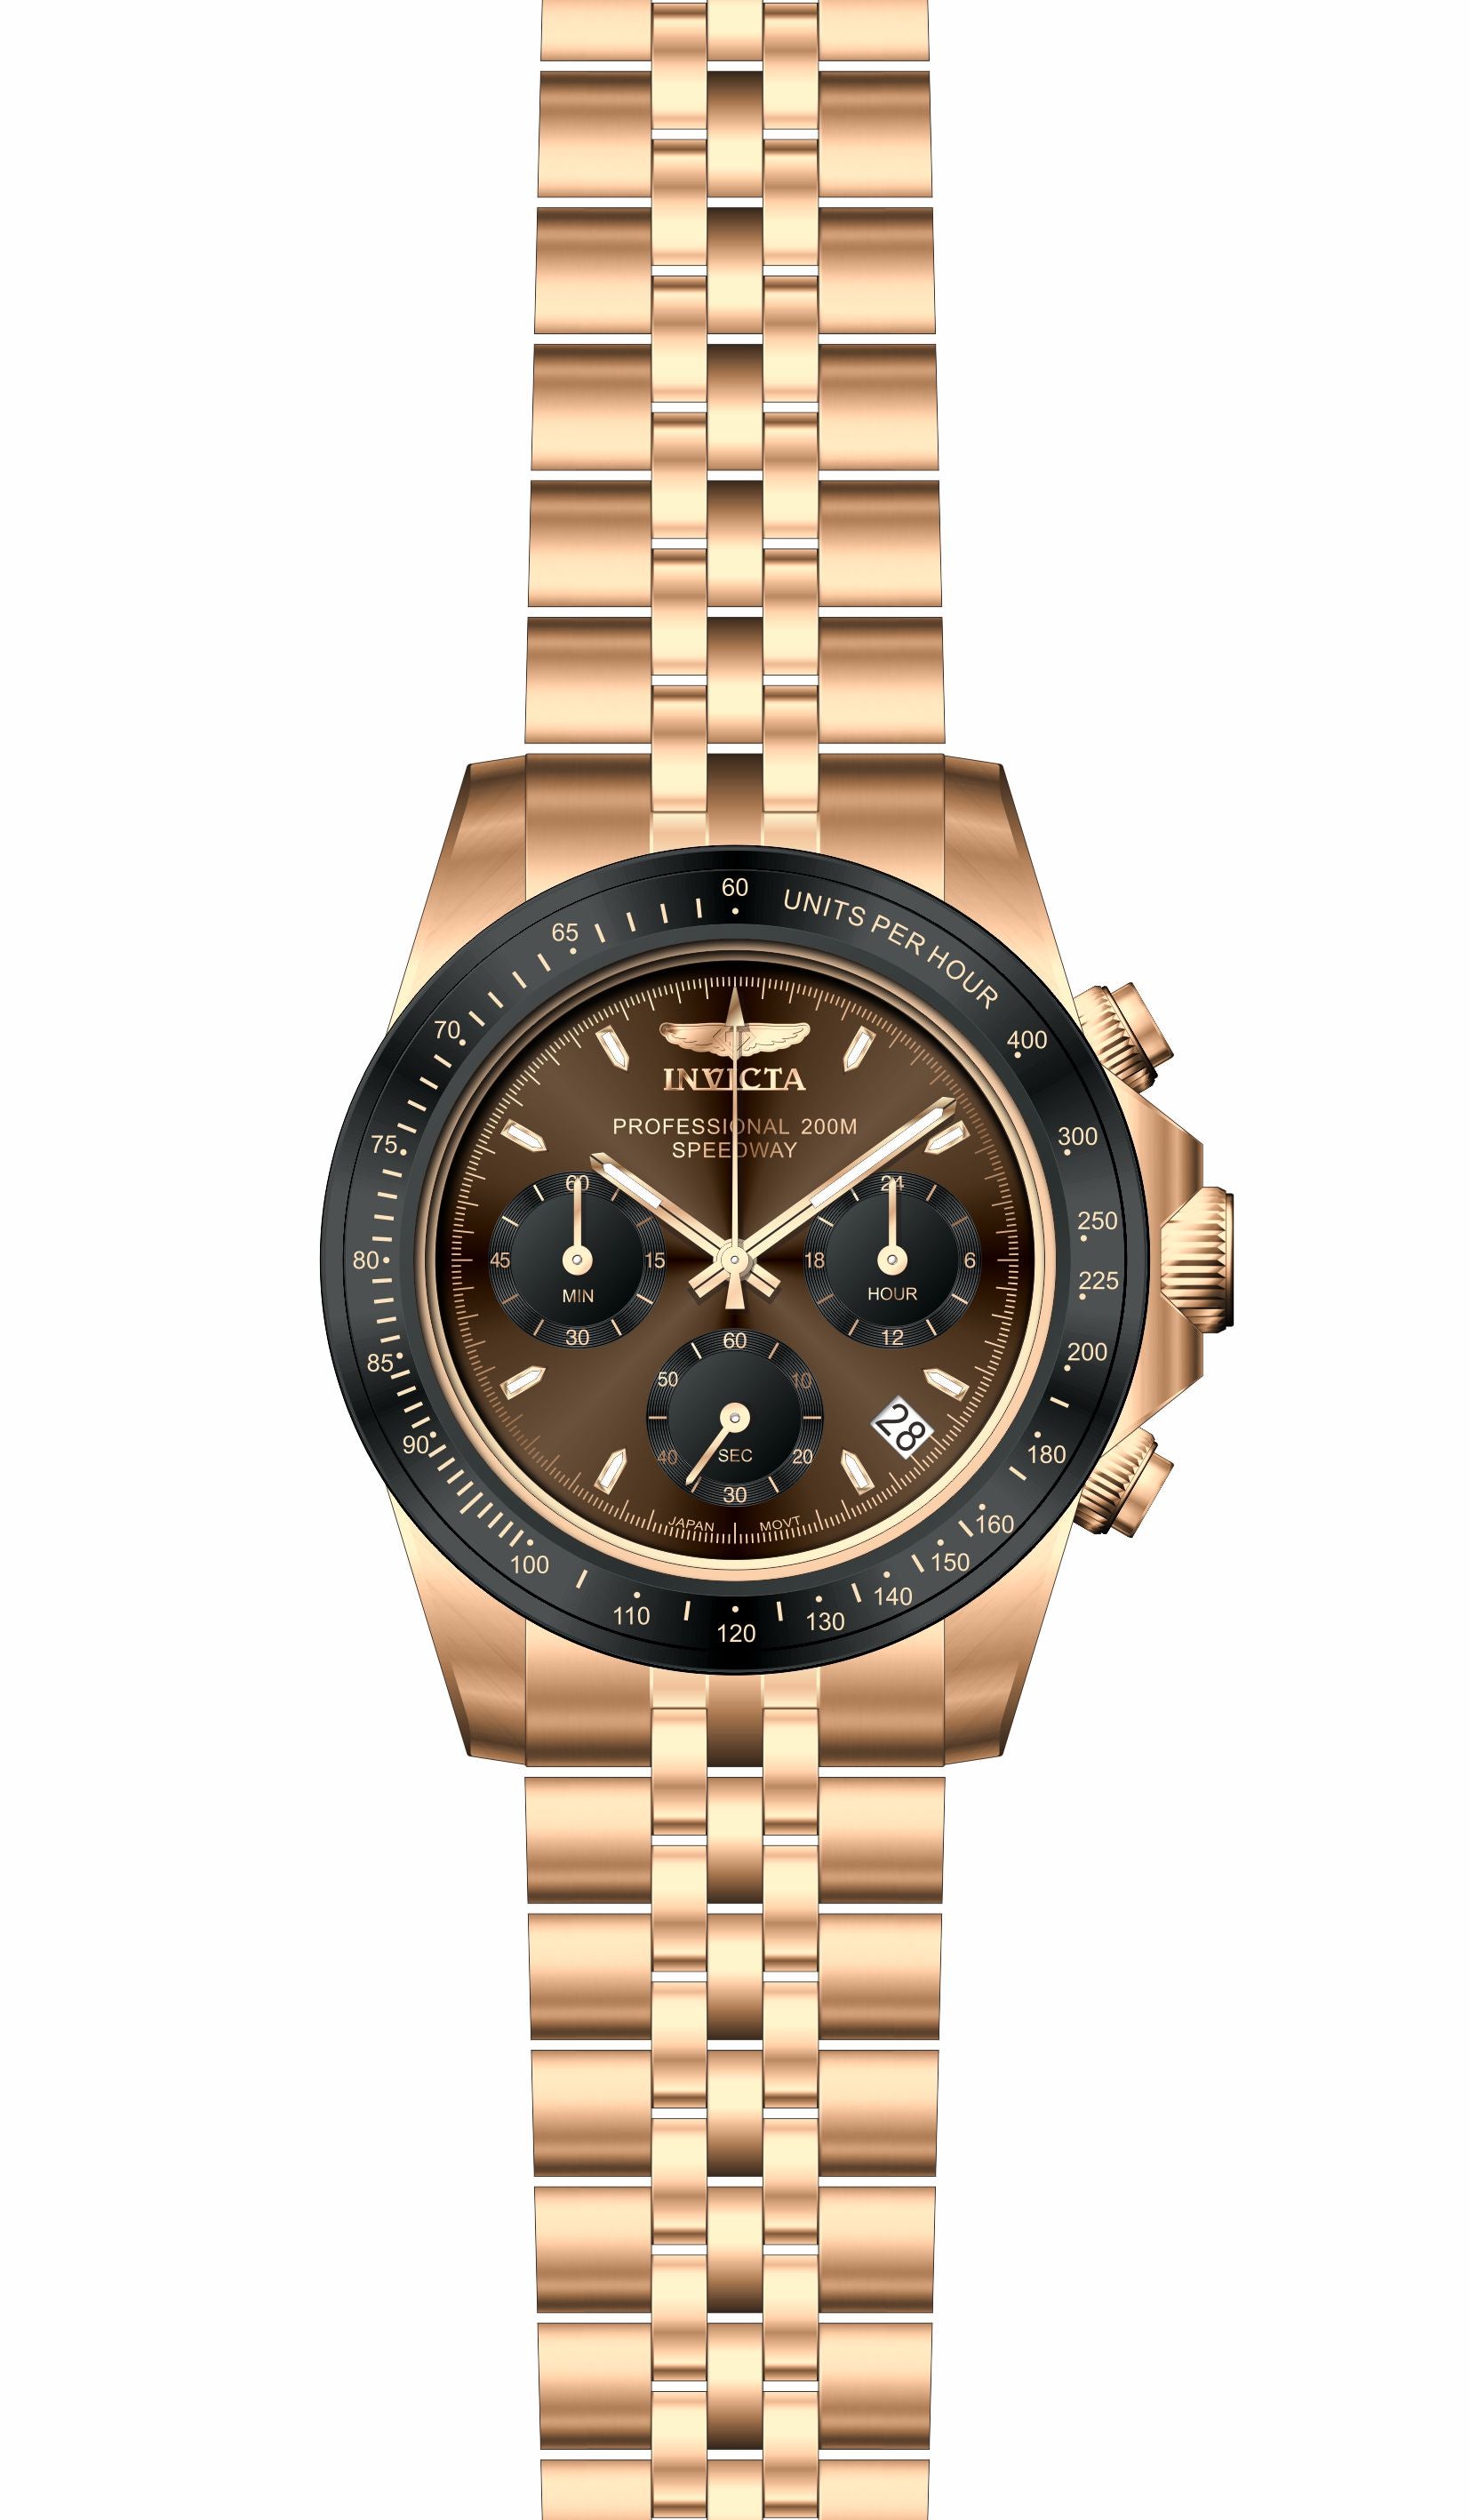 Band for Invicta Speedway Men 36736